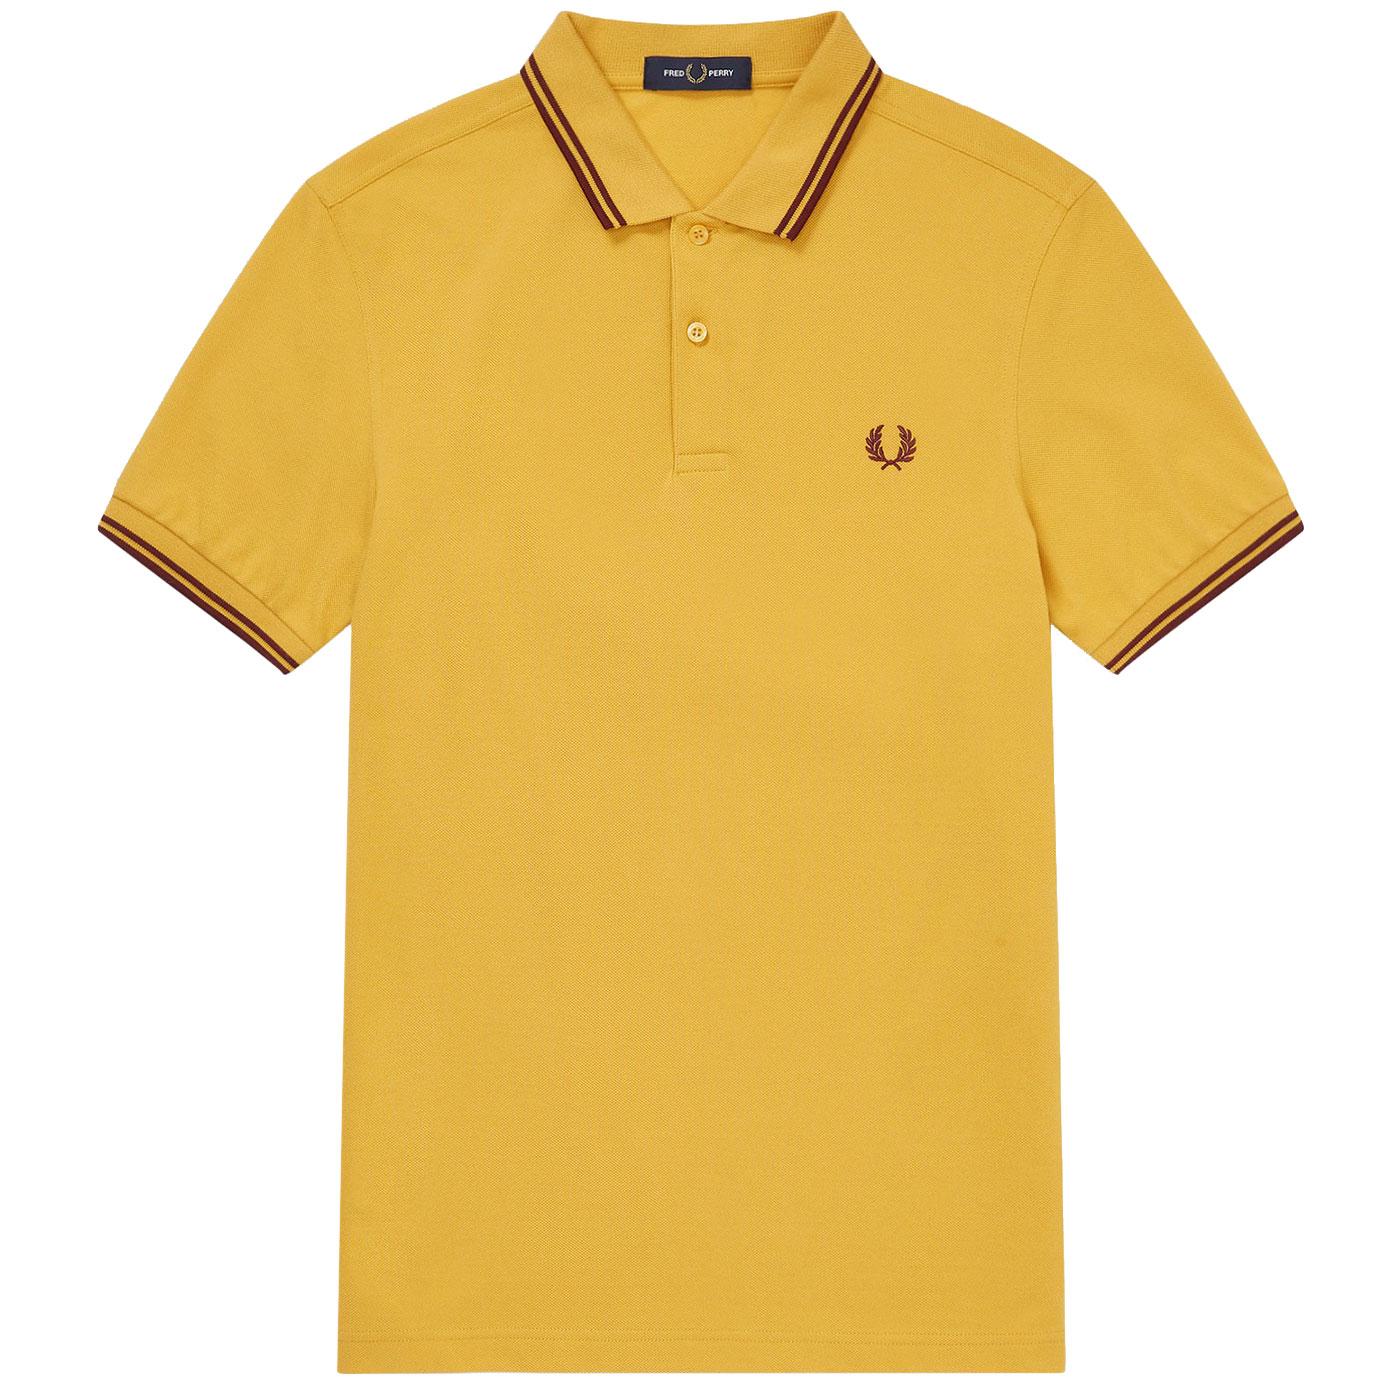 FRED PERRY M3600 Men's Twin Tipped Pique Polo in Gold